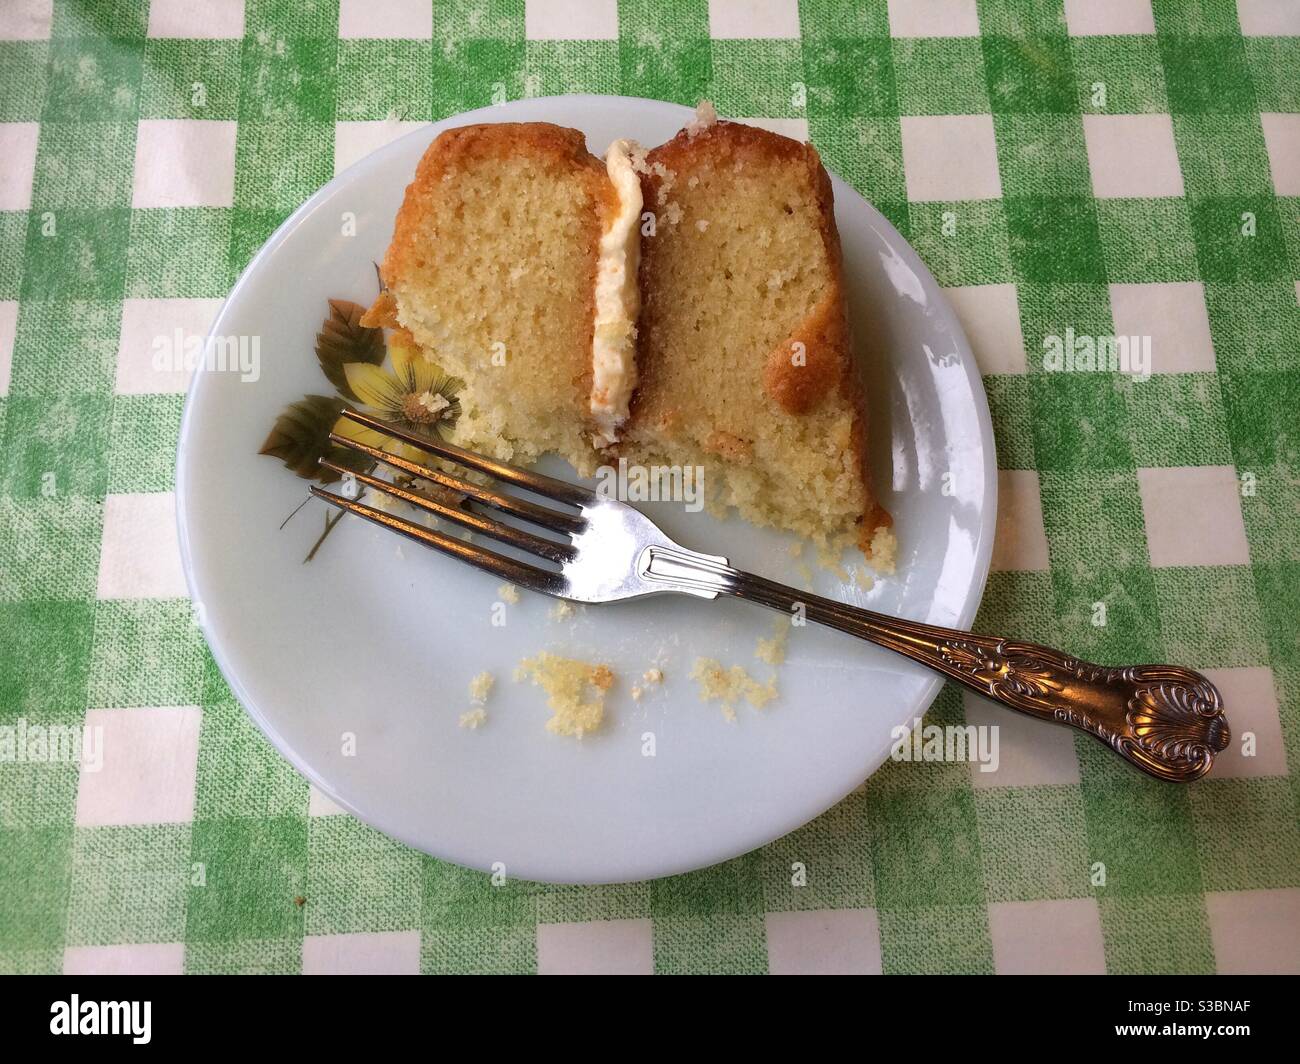 Half eaten Victoria sponge cake on a pretty plate with a green gingham tablecloth, flat lay Stock Photo